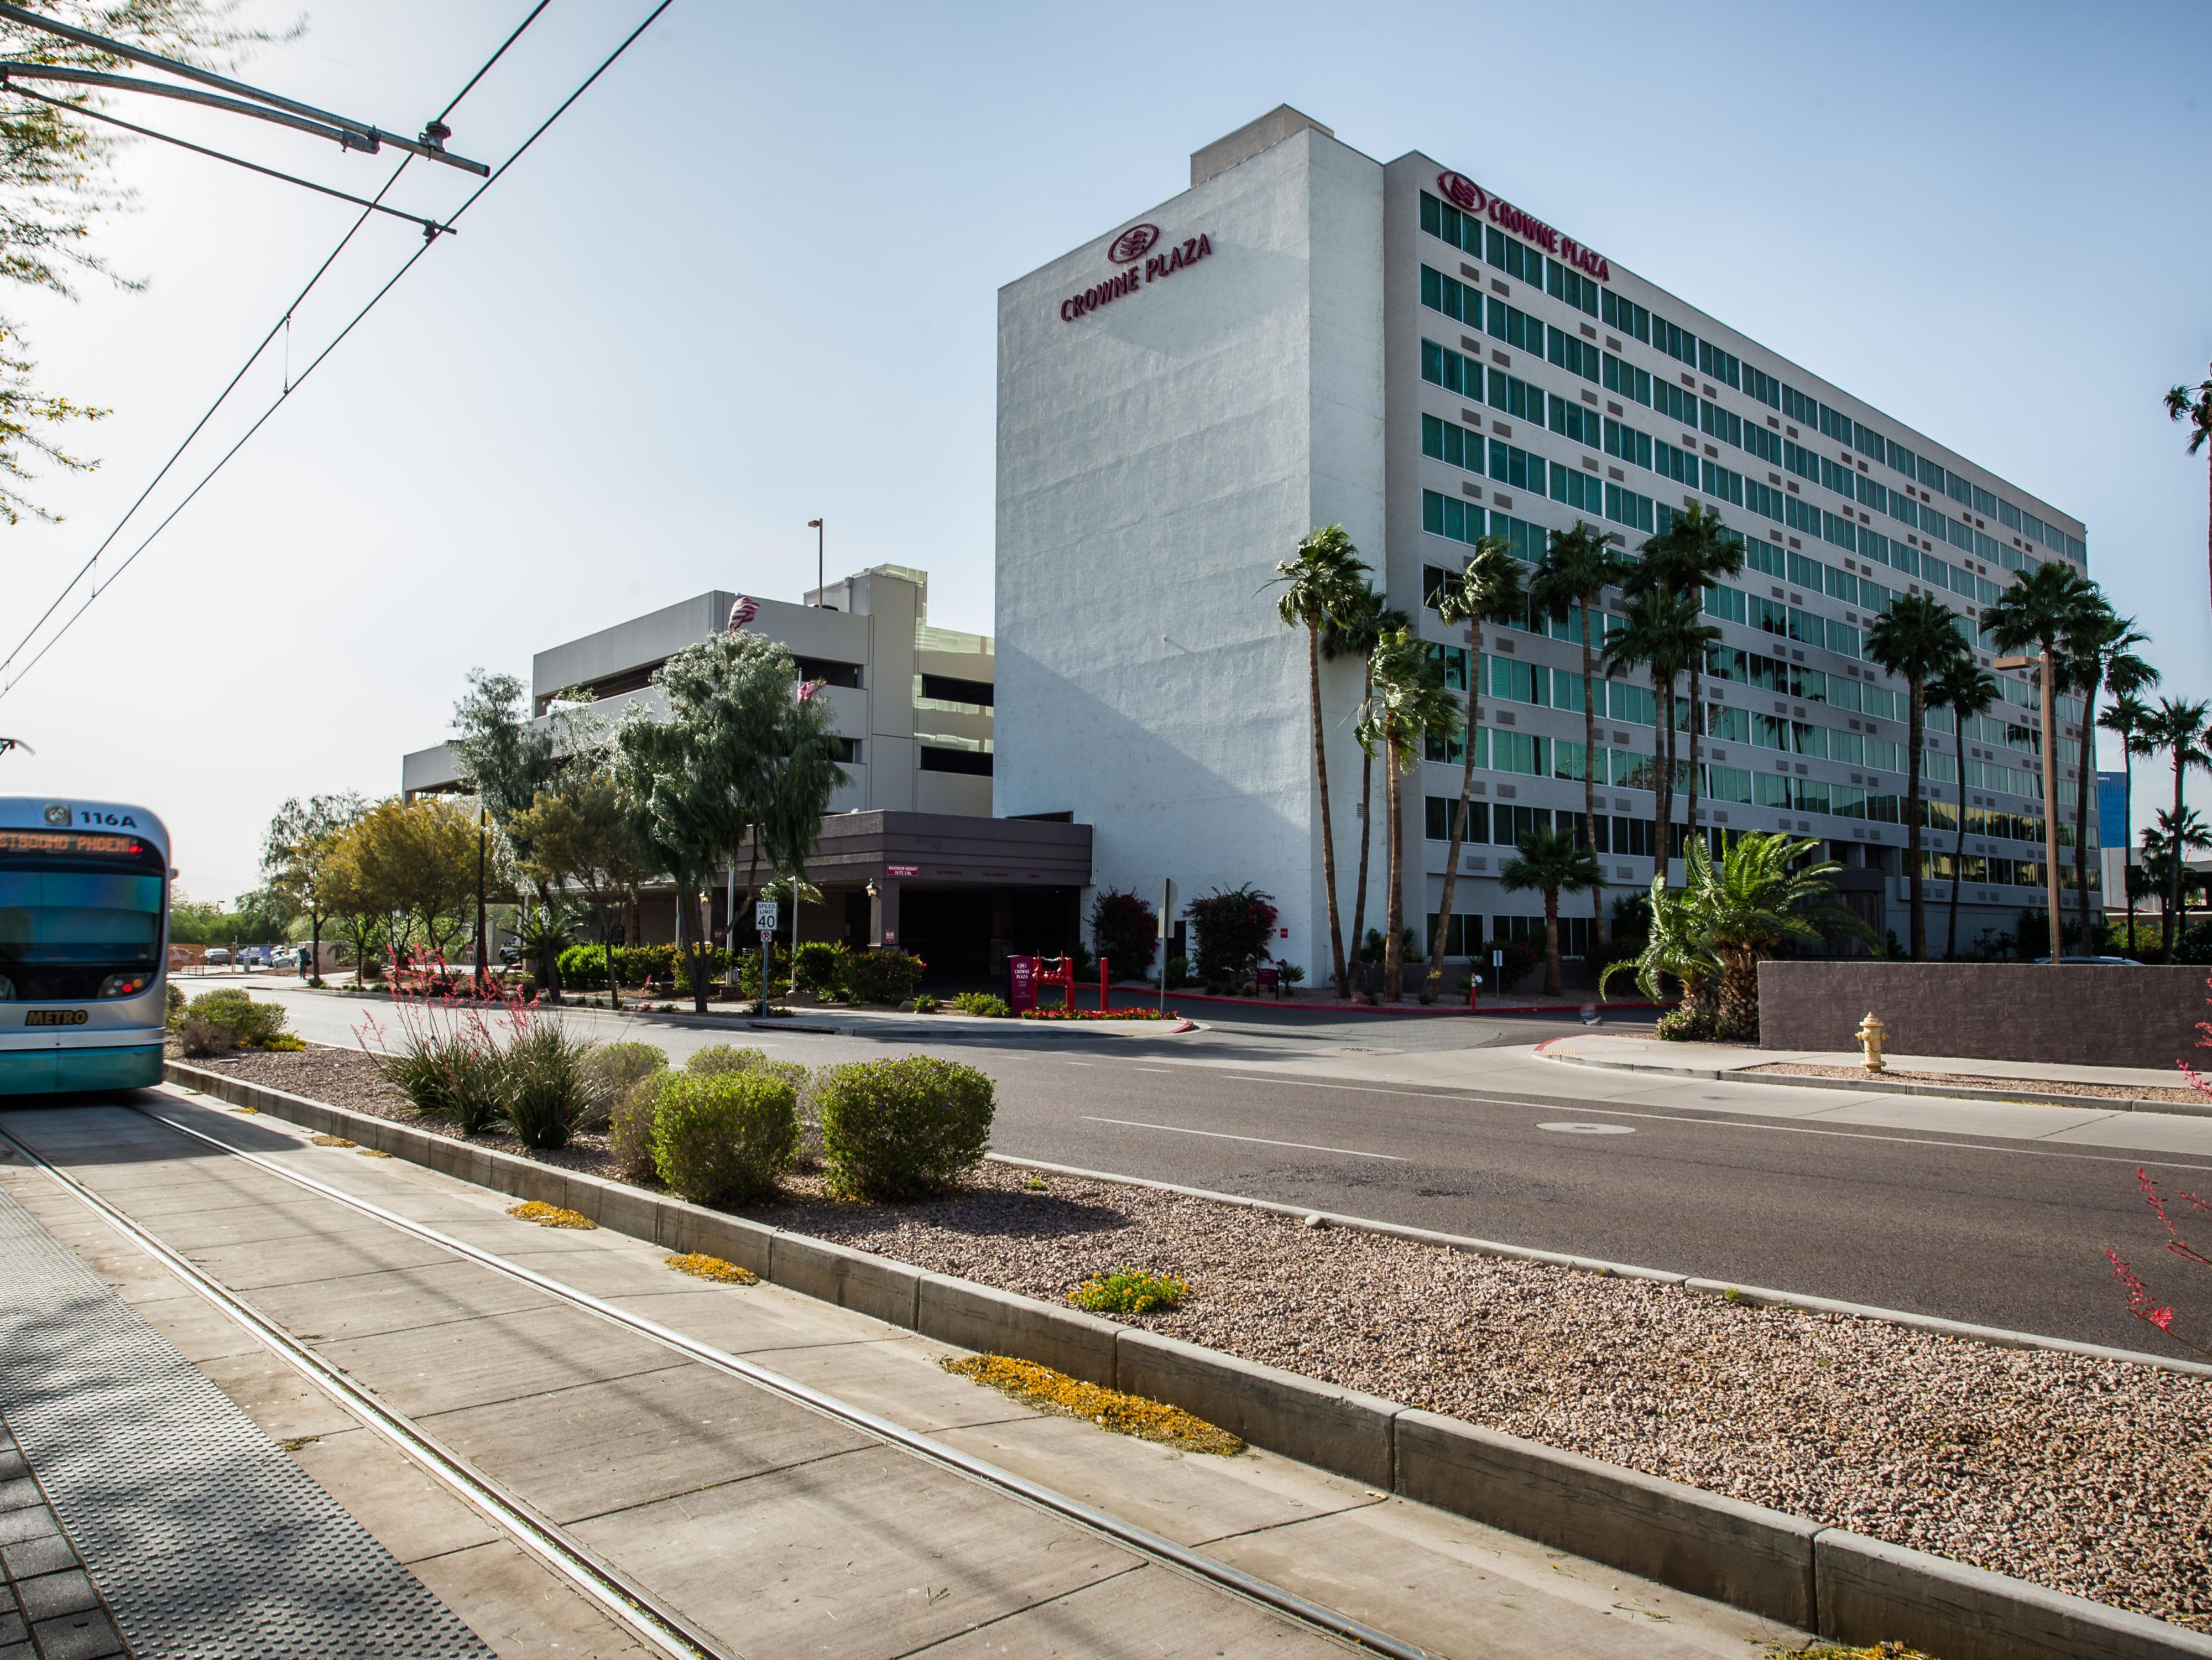 Situated near major corporations and the METRO Light Rail, our Phoenix hotel offers easy access to downtown Phoenix, Cityscape, and the dynamic Tempe Mill Avenue Entertainment District. Catch a game at Footprint Arena or Chase Field and visit Desert Botanical Garden or the Phoenix Zoo. Our hotel puts you in the heart of the action.